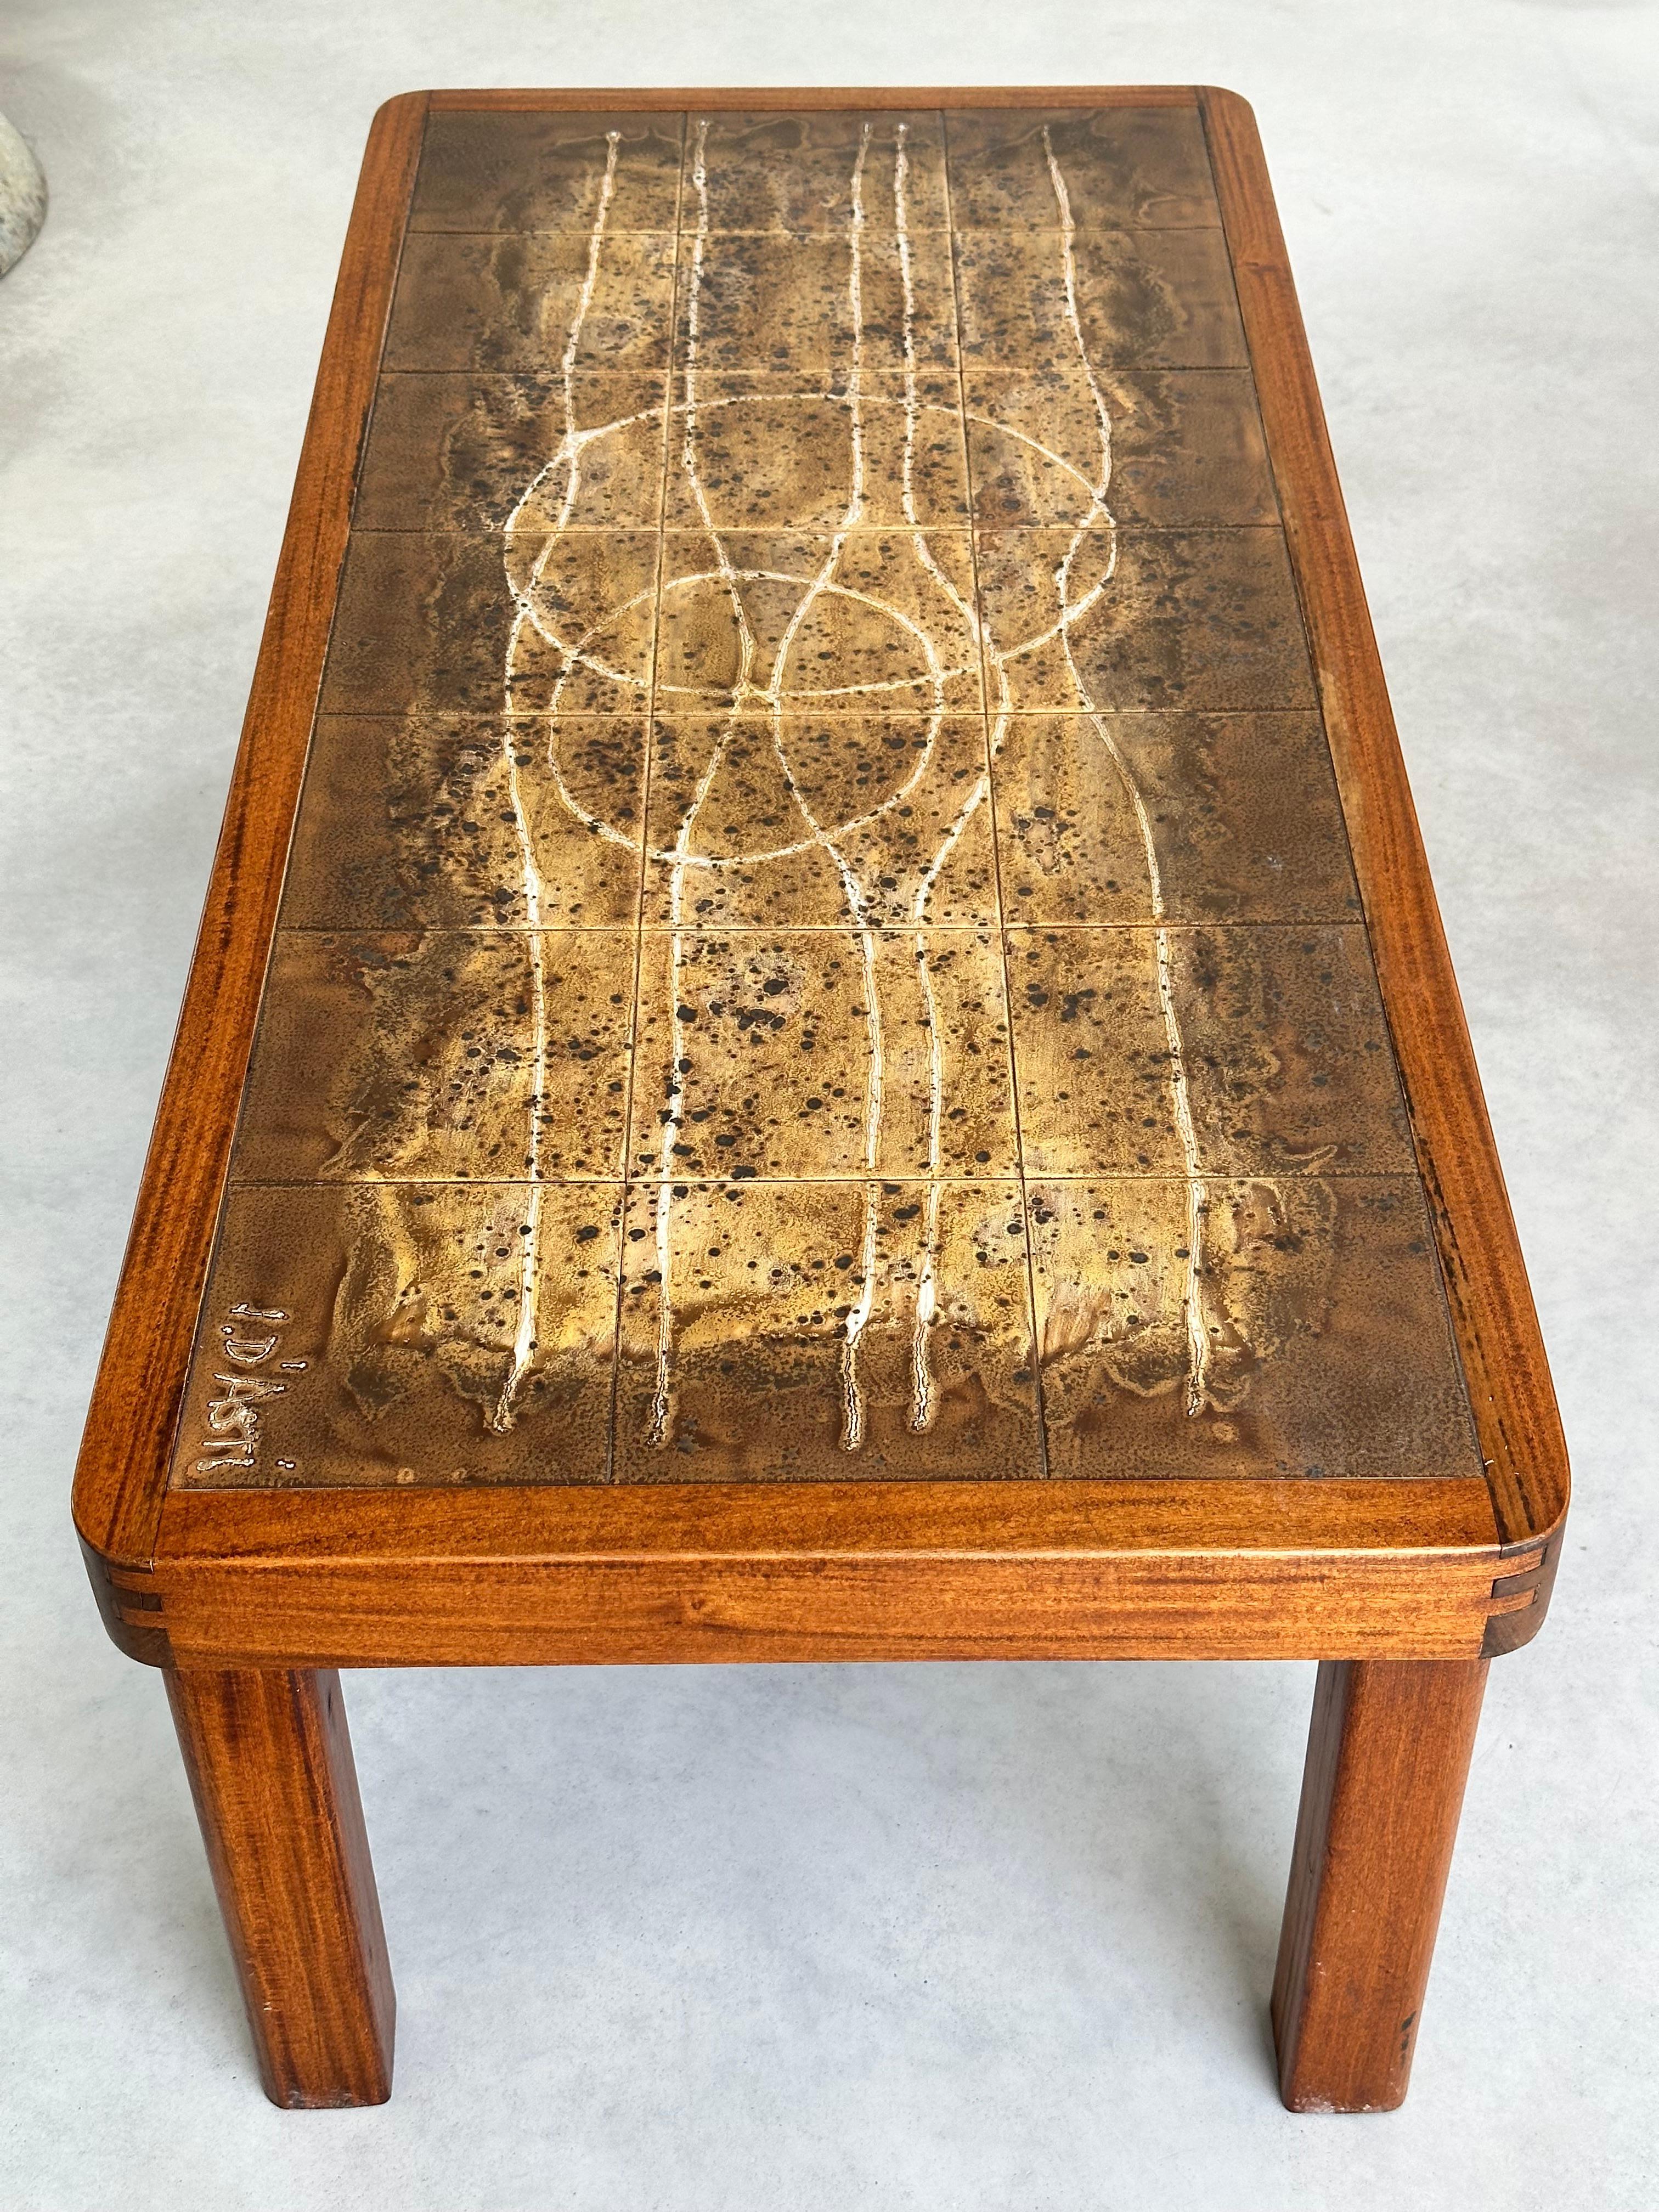 Wooden coffee table (dovetail assembly) and enameled ceramic top (iridescent) signed Jean d'Asti and made in Vallaurise (south of France).

Abstract decor in shades of beige, brown, black colors. Rustic chic.

Big size, good condition, 1970s.

The